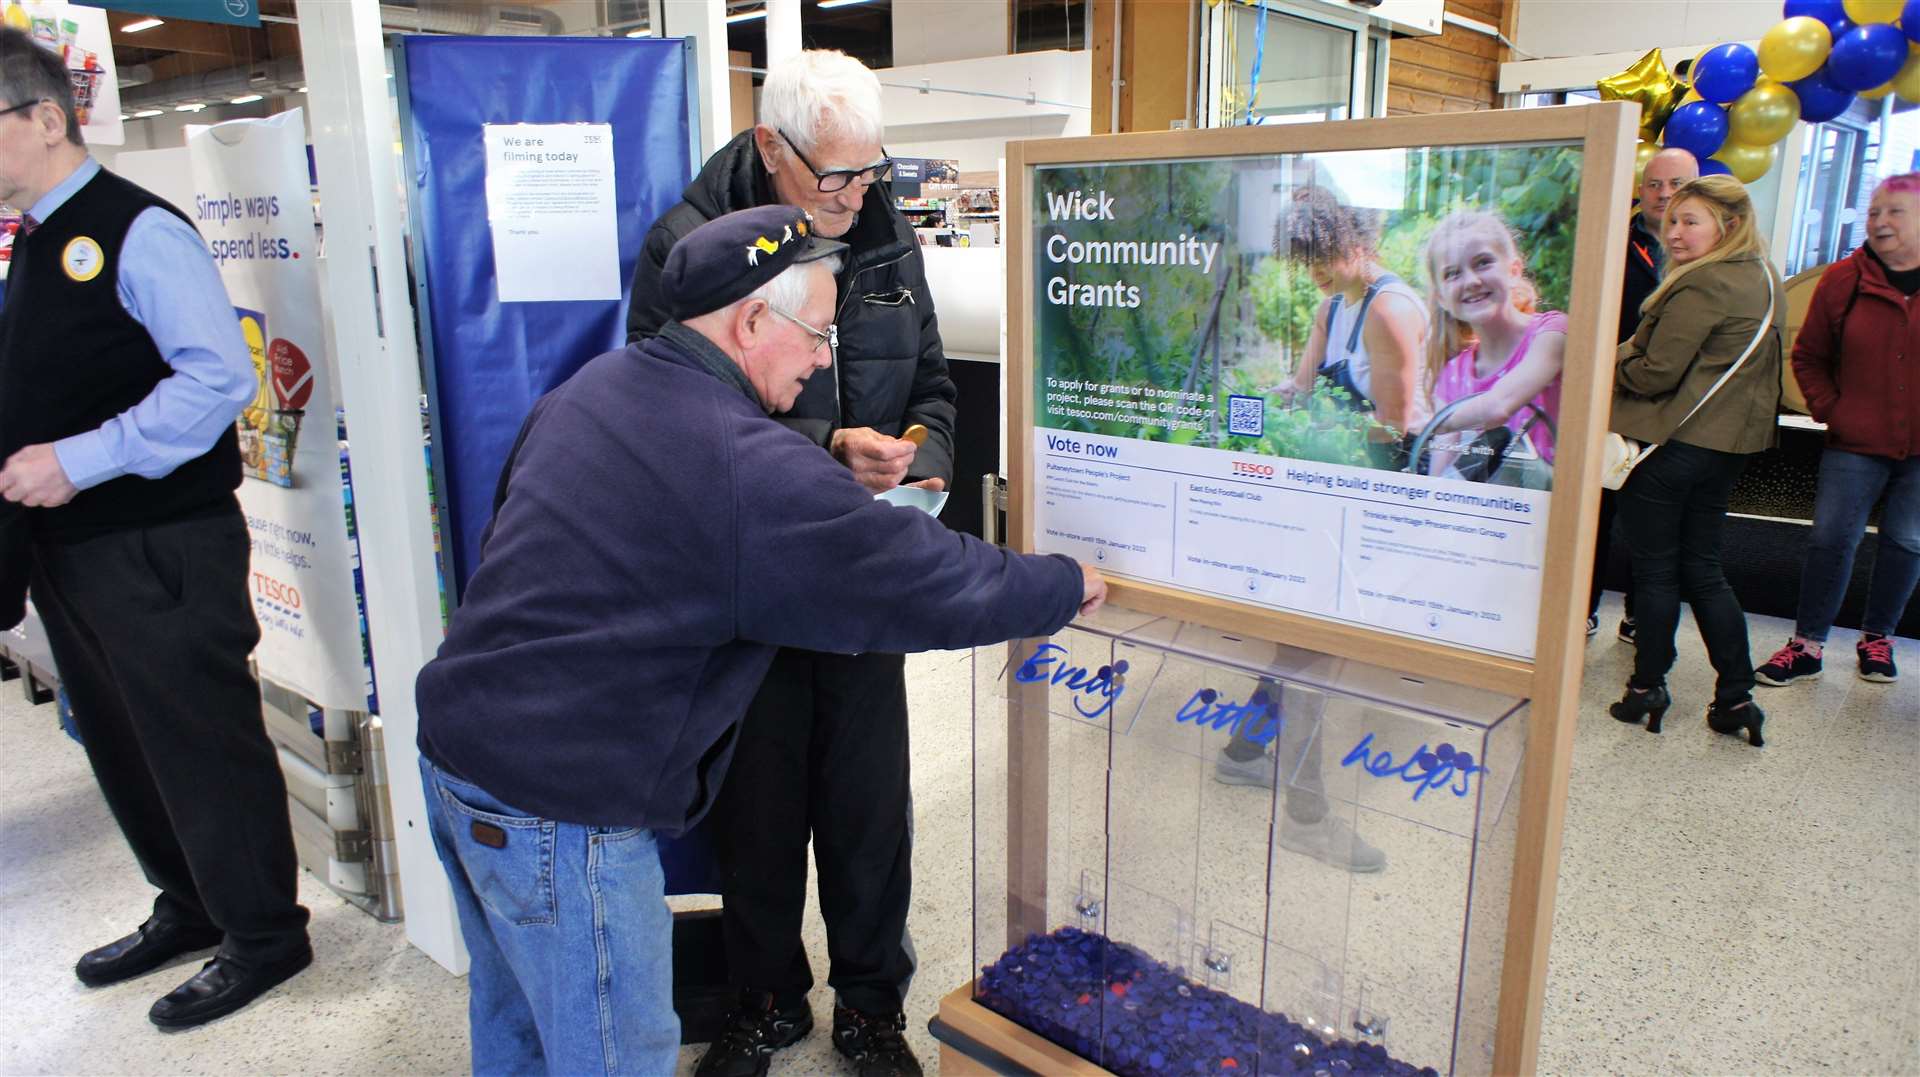 John Manson from Scrabster was just one of many who took part in the lucky dip. John places his blue token in the charity box while Denny Swanson, who helped out on the day, looks on. Picture: DGS